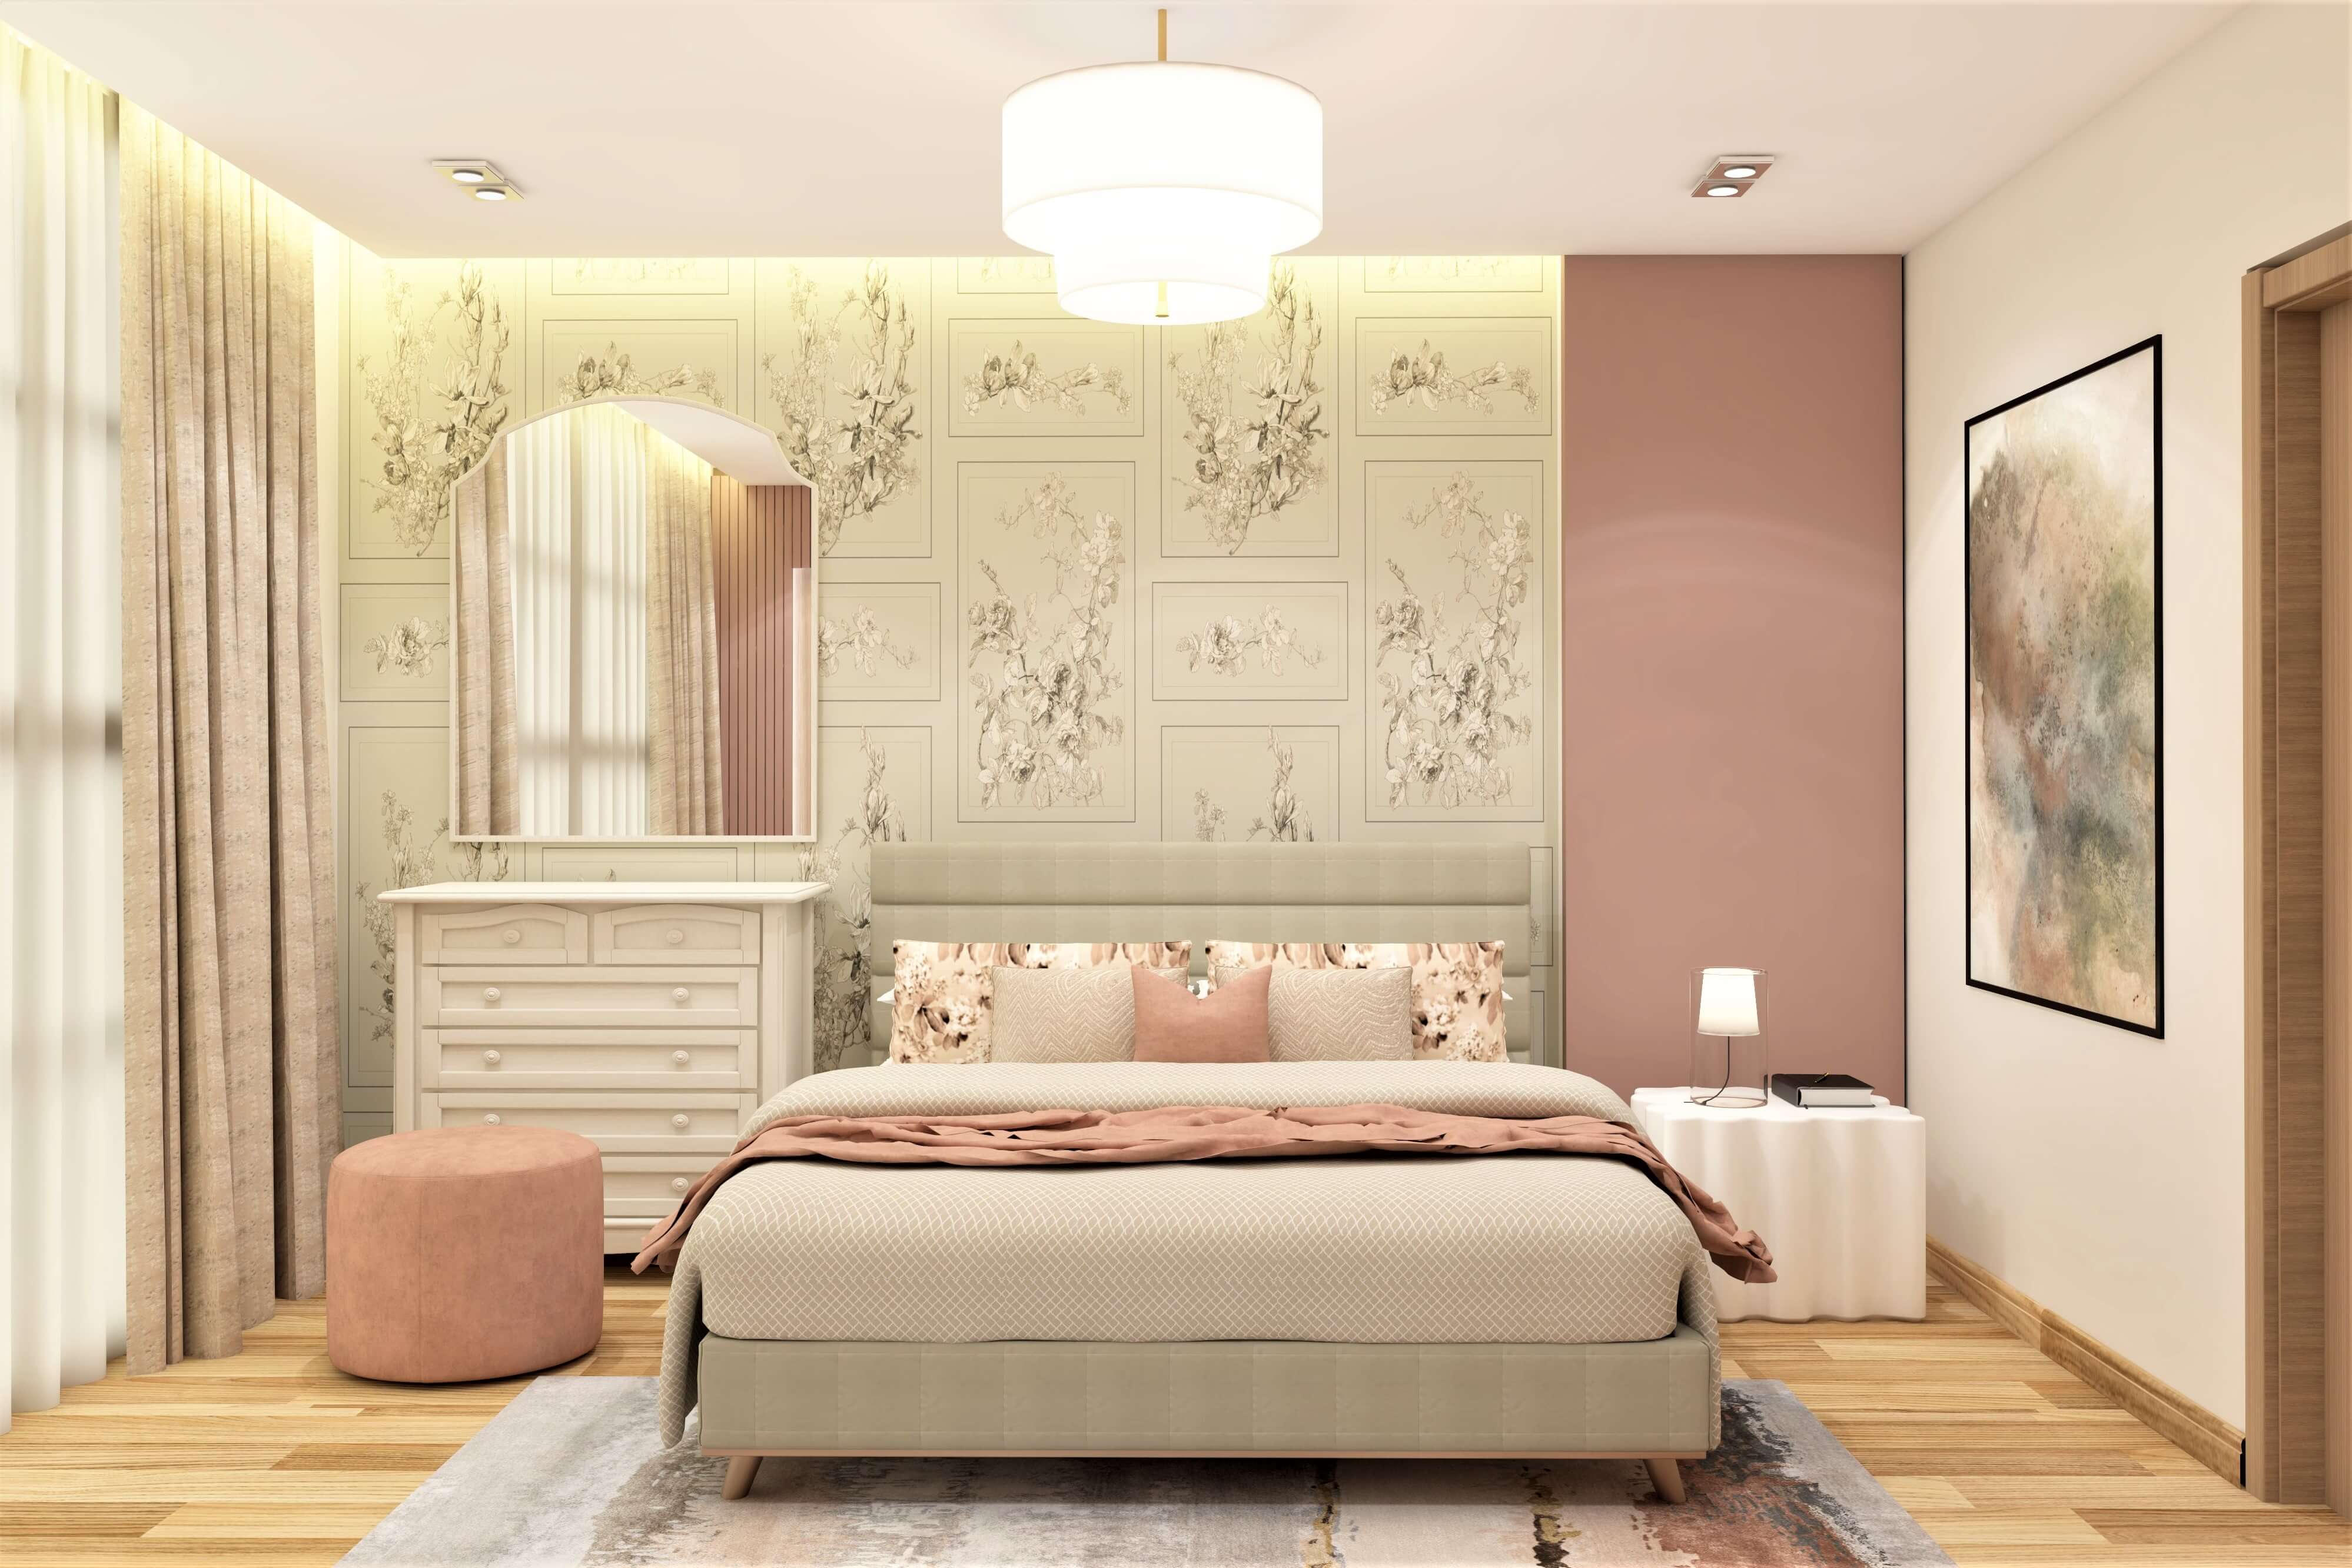 Elegant bedroom space with floral aesthetics - Beautiful Homes